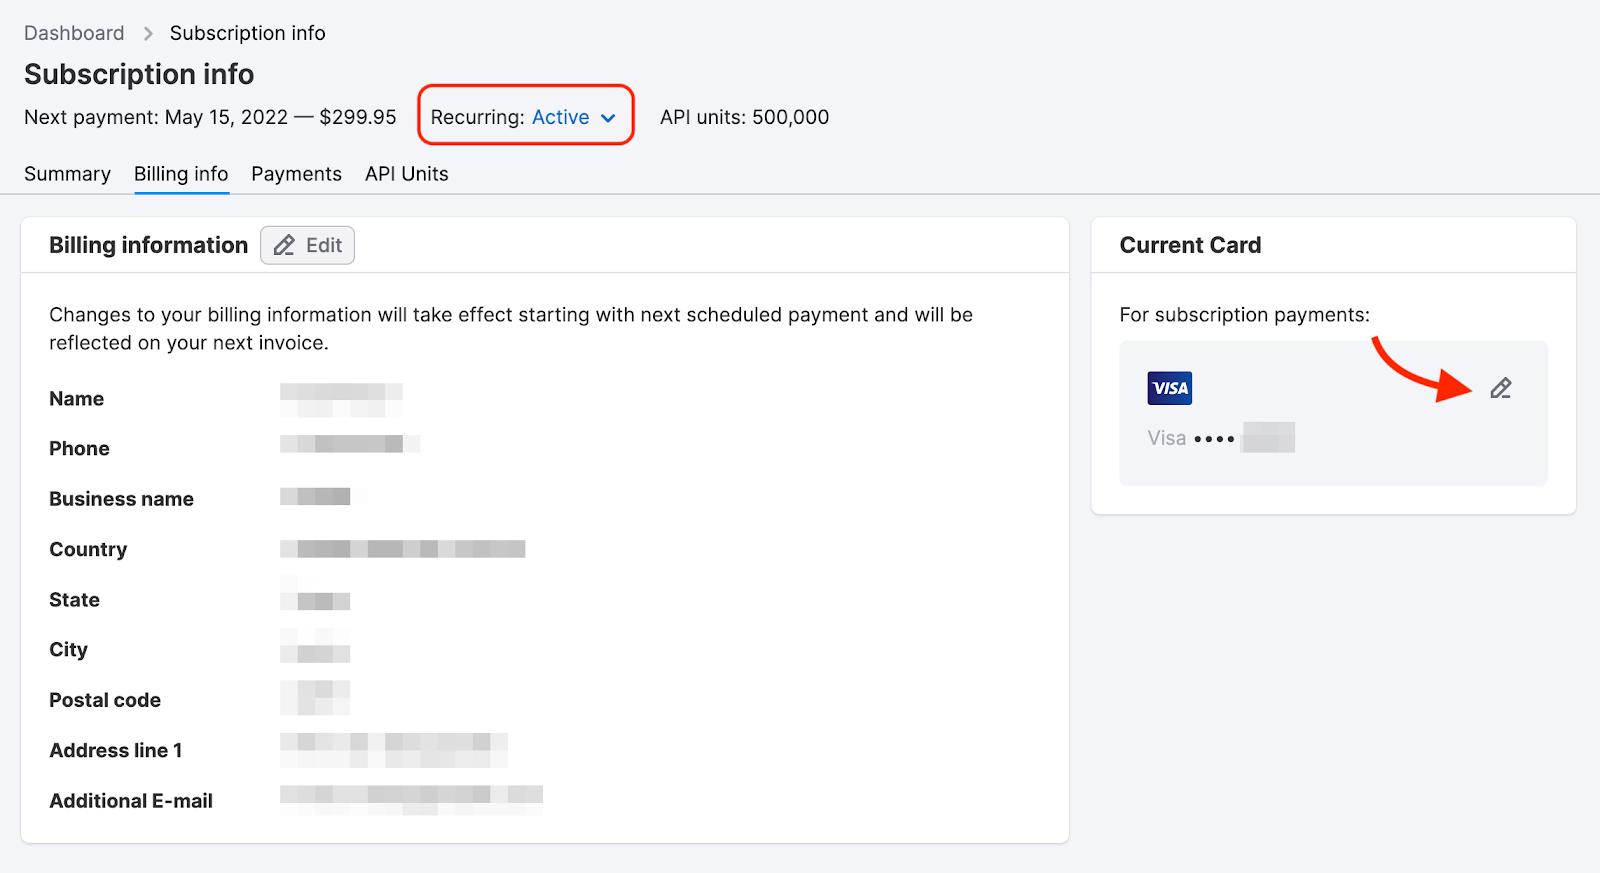 In this screenshot from Billing info, a red rectangle is highlighting the status of the subscription 'Recurring: active" and a red arrow is pointing to the "Edit" button for updating a credit card. 